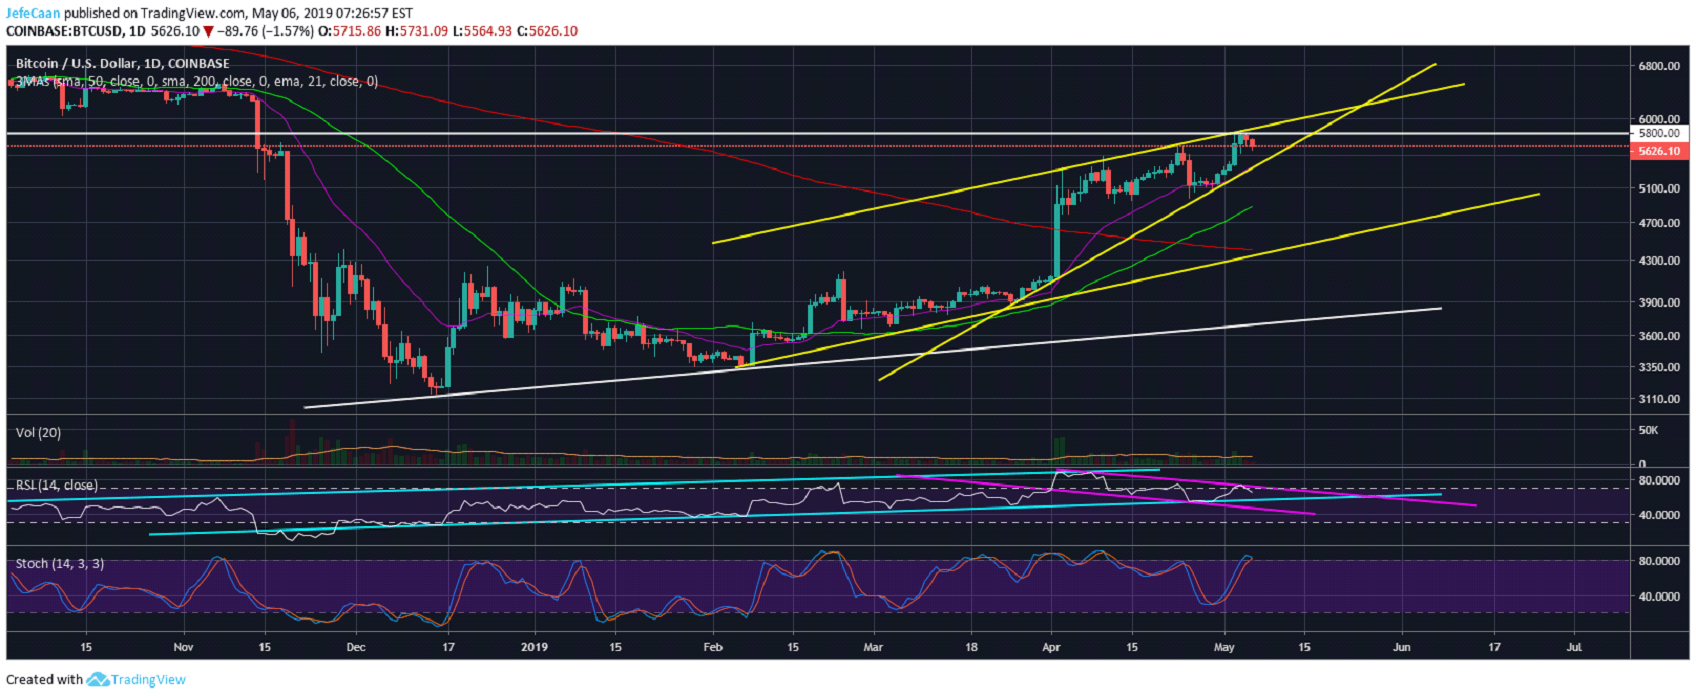 Bitcoin (BTC) Shows Extreme Weakness As Price Declines Below $5,800